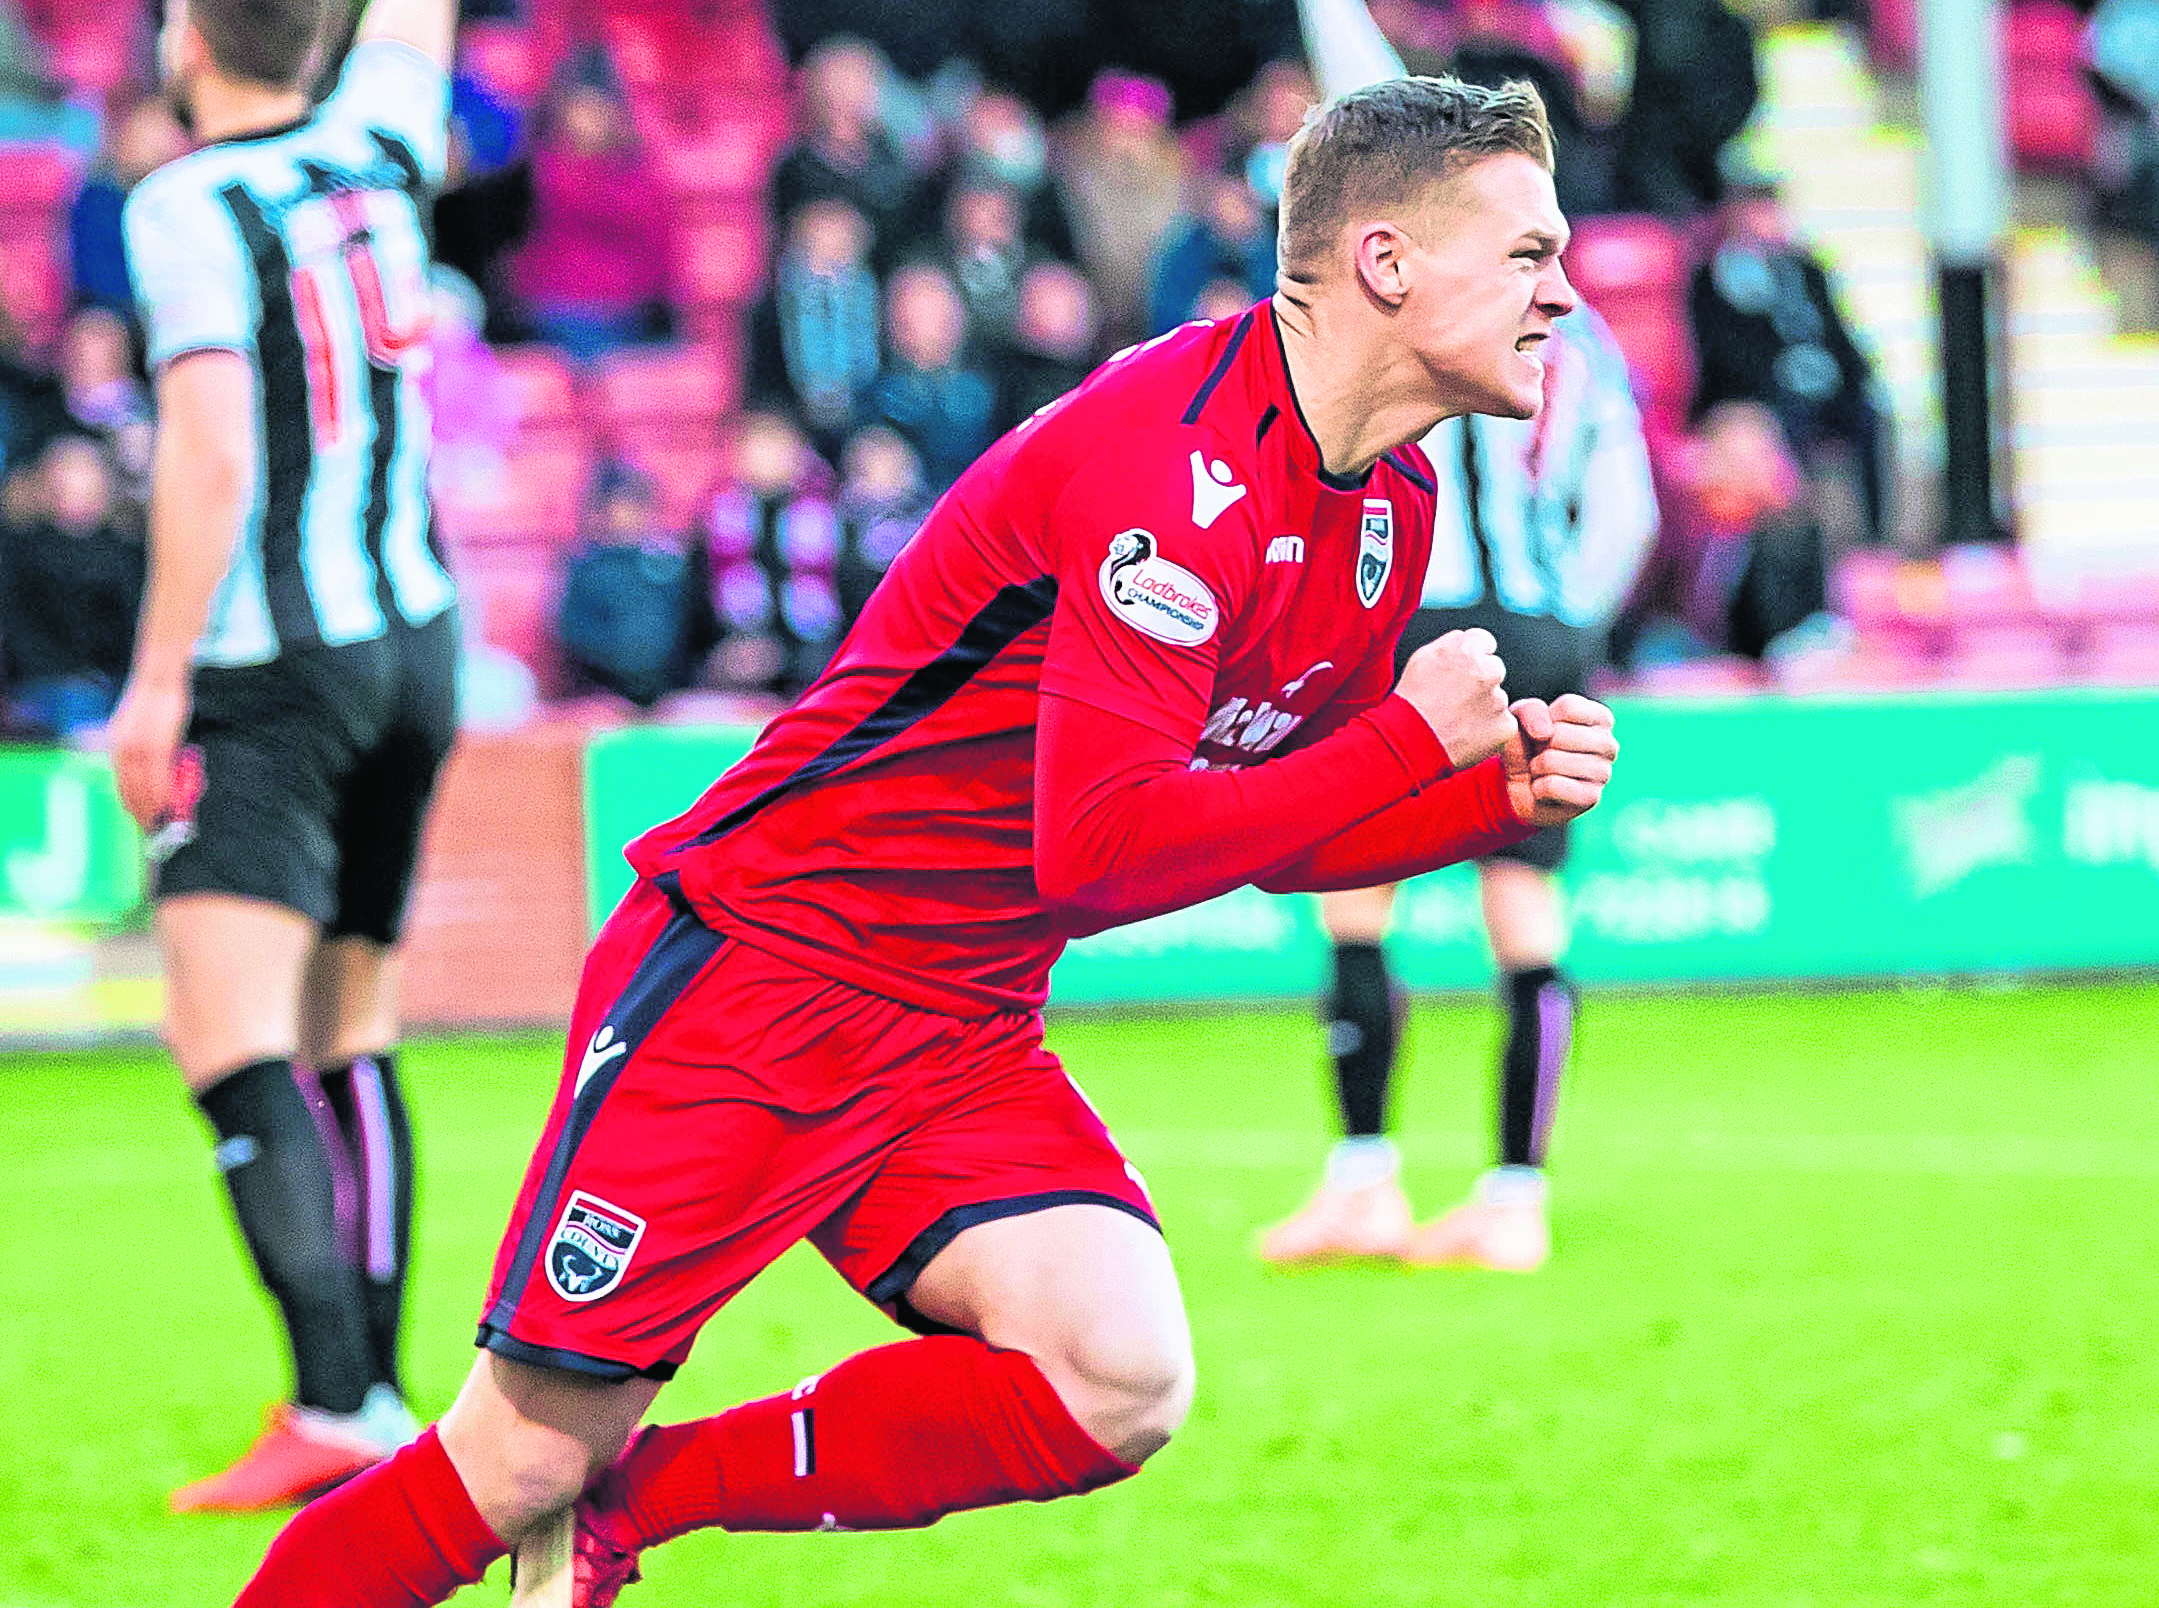 Ross County's Billy McKay celebrates after scoring to make it 1-1.